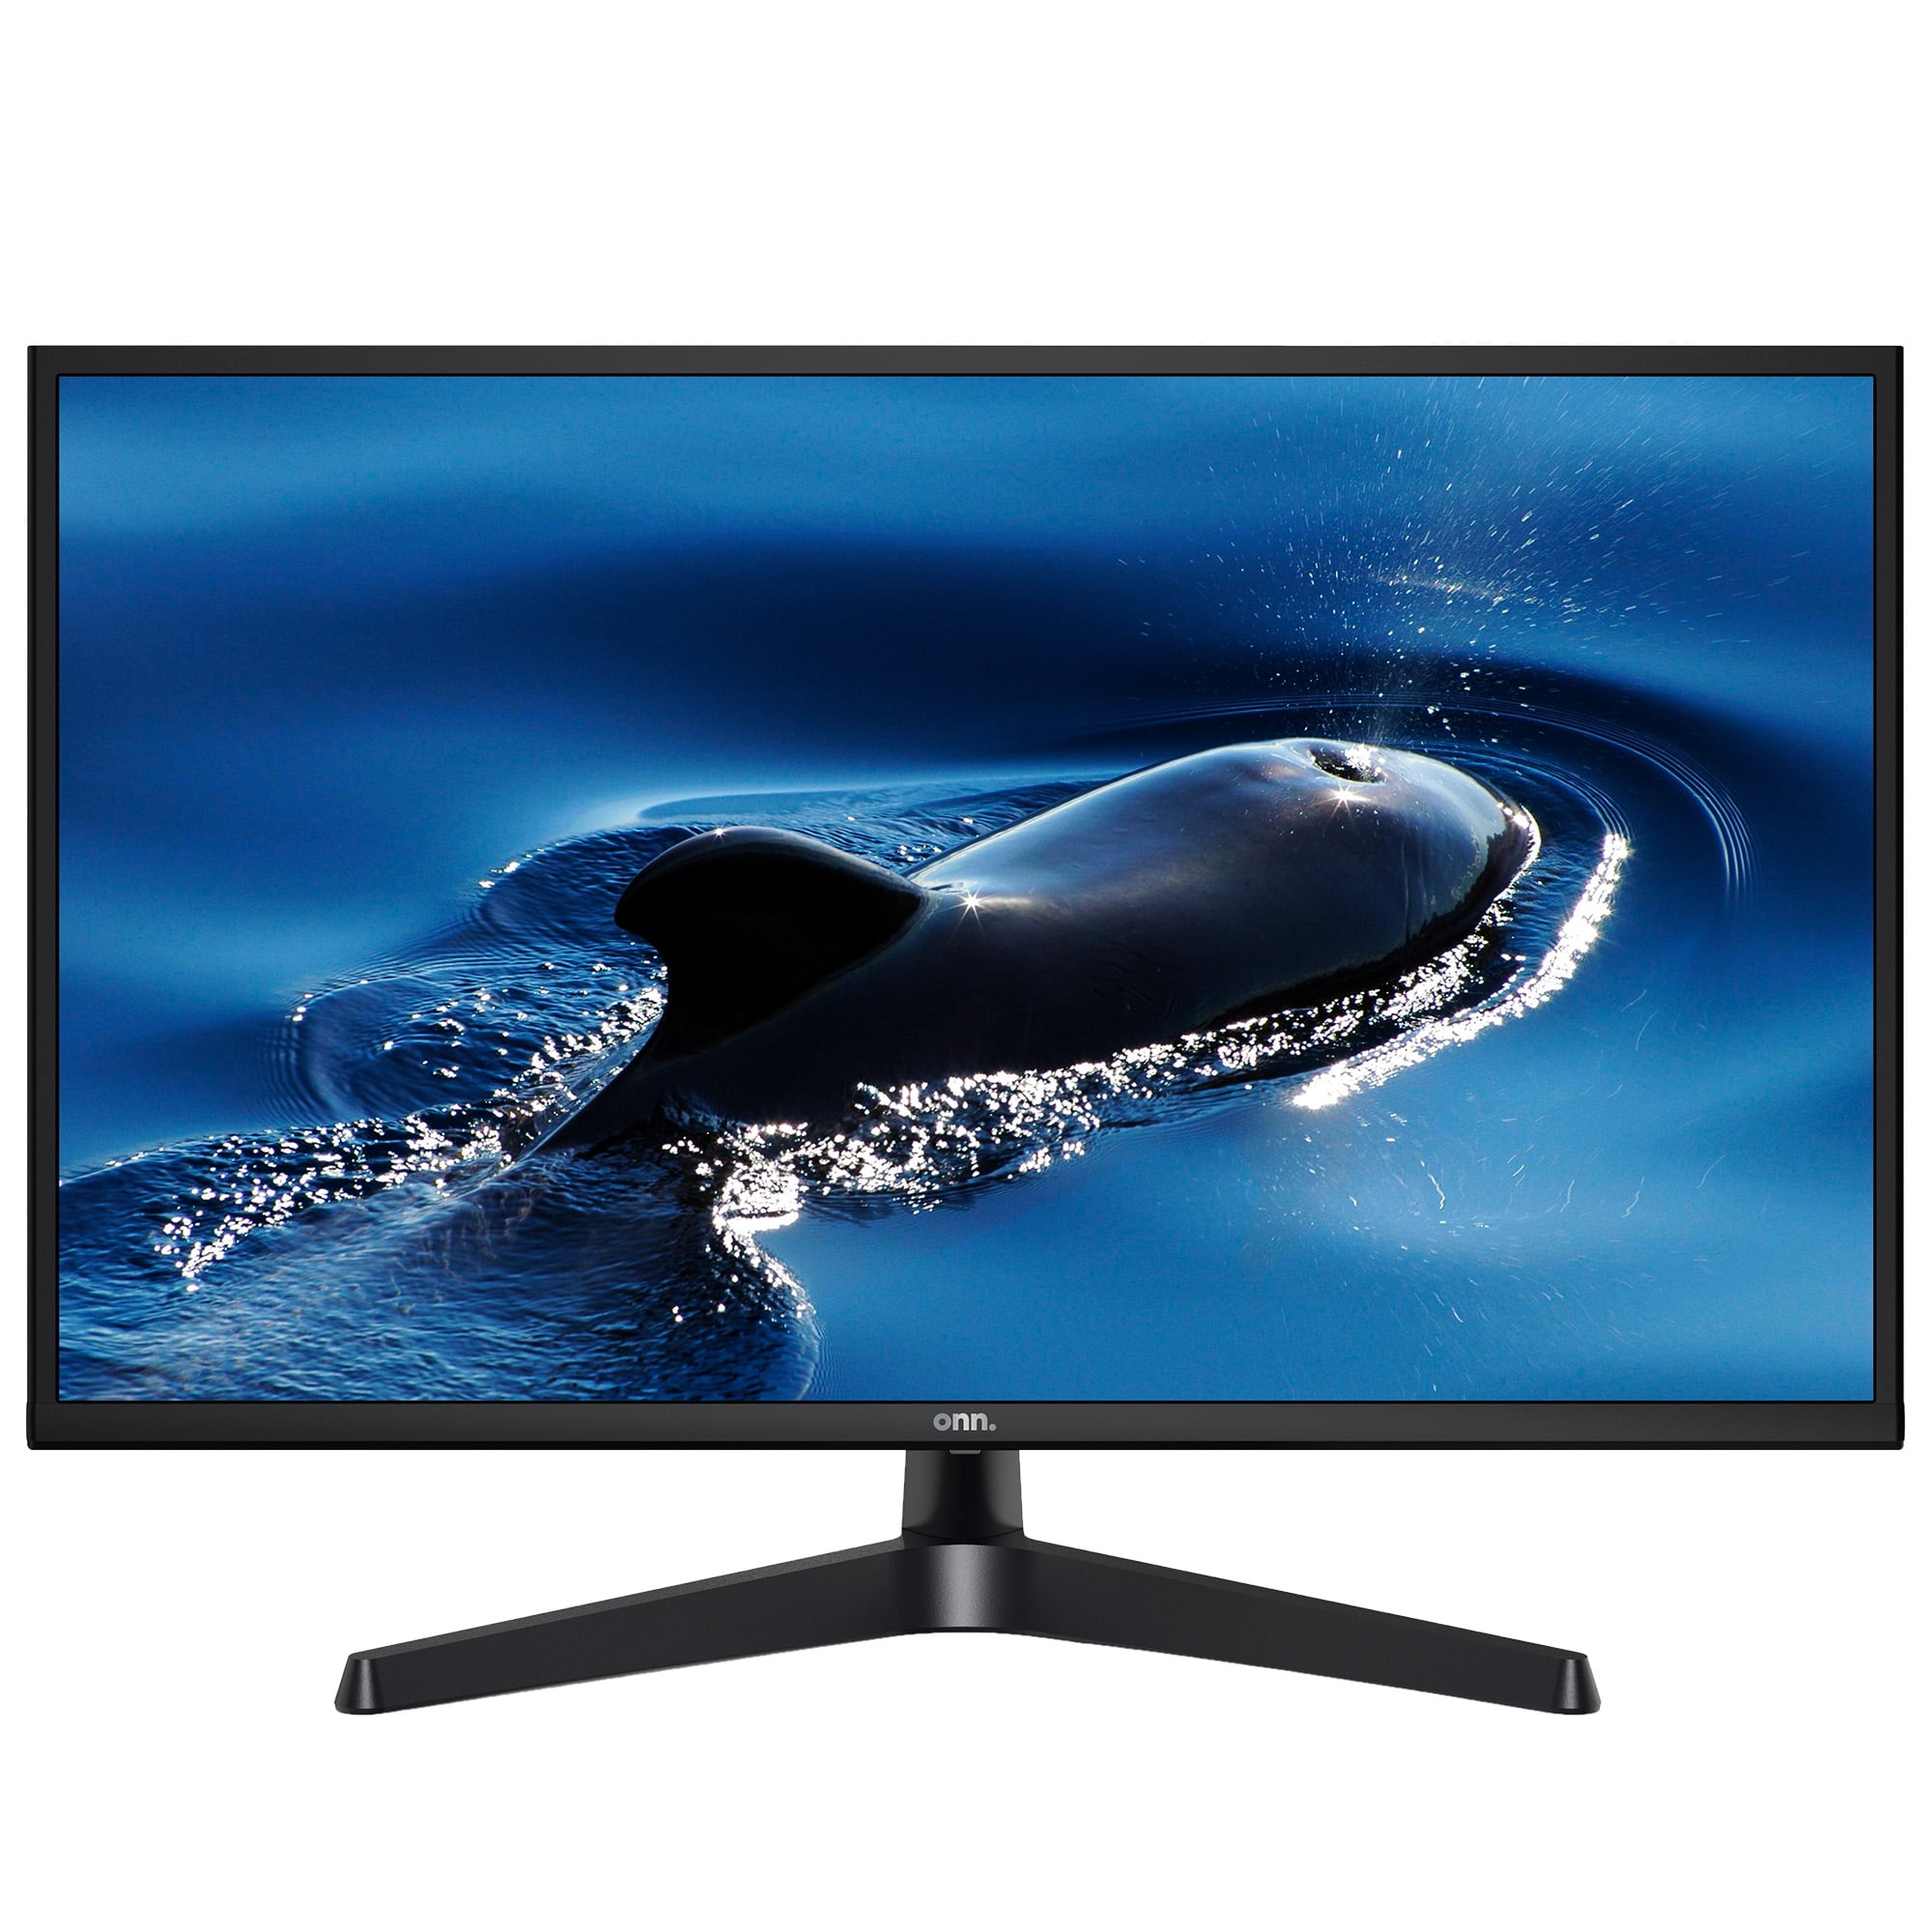 onn. 24 FHD (1920 x 1080p) 75hz Office Monitor with 6 ft HDMI Cable, Black